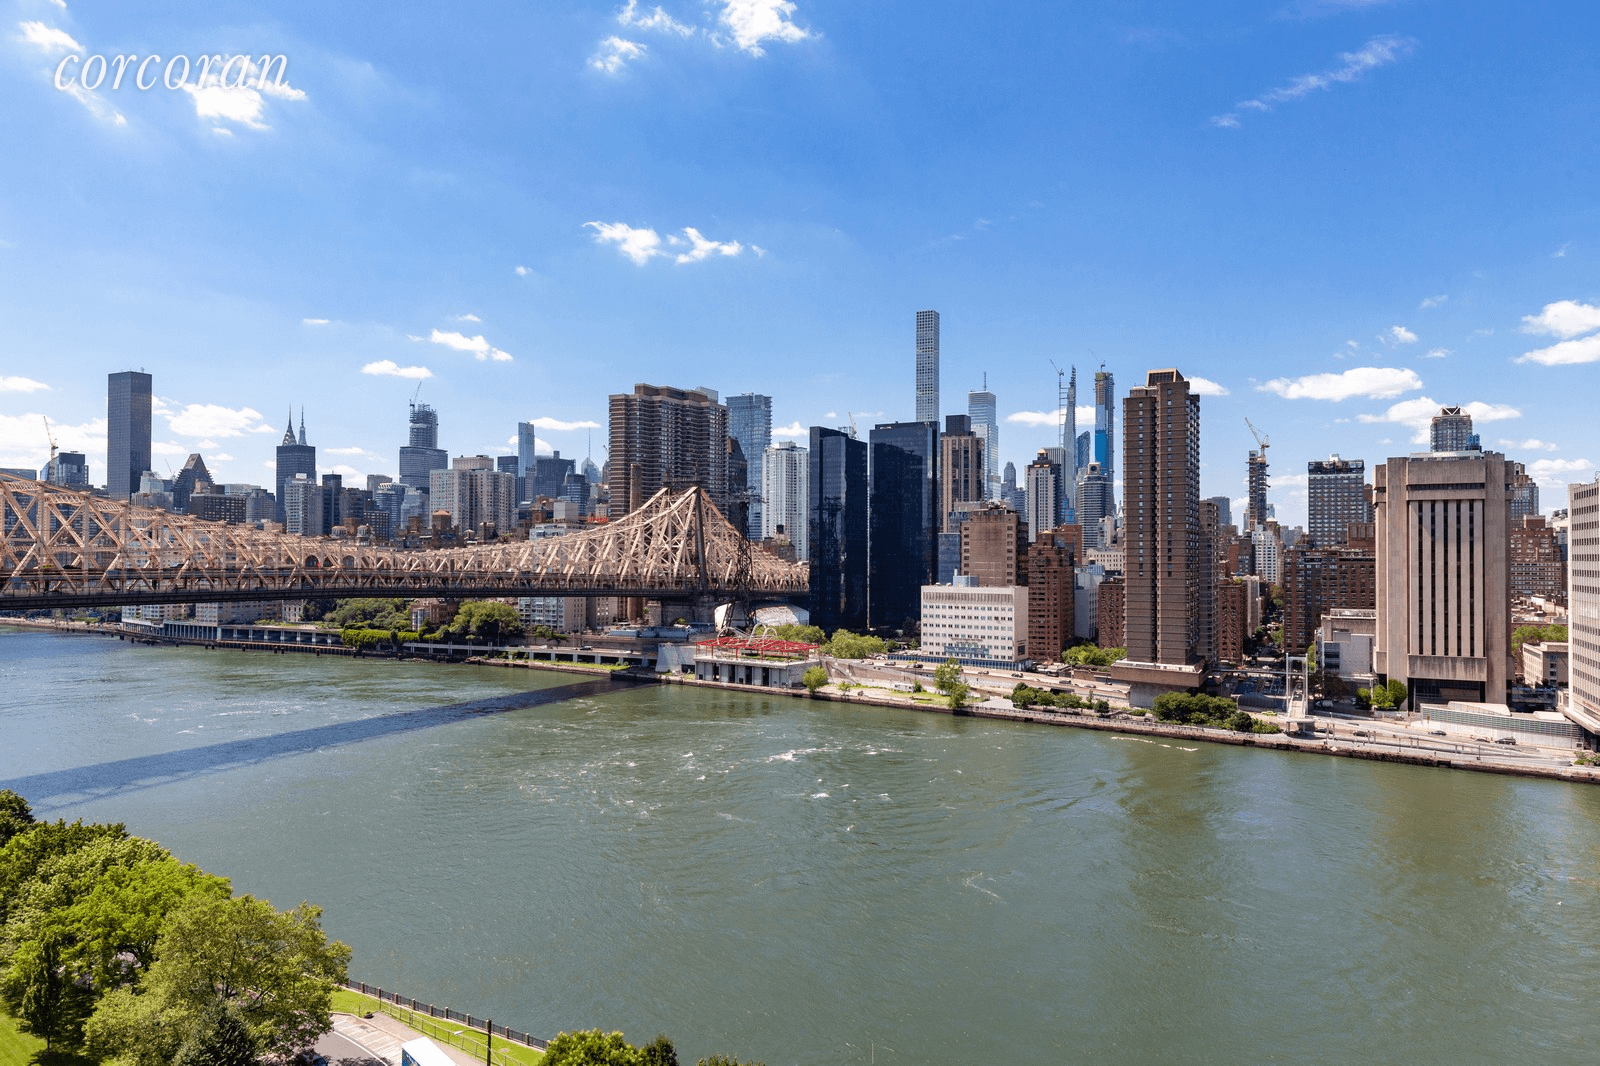 New Massive 1 Bedroom Apartment with Washer Dryer in Unit in one of the Most Desirable Condo Buildings on Roosevelt Island !